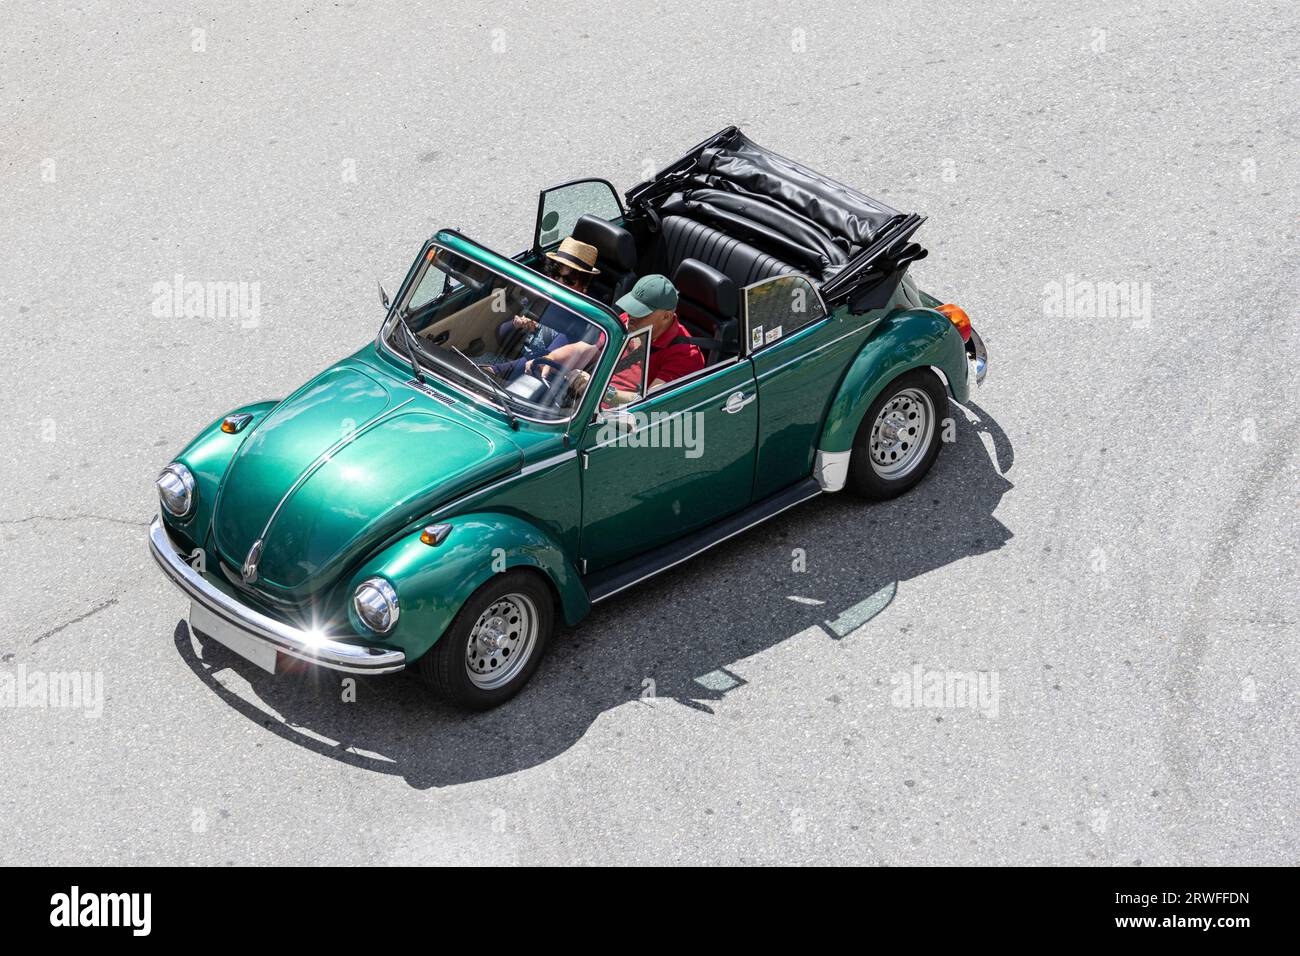 Galicia, Spain; august 27, 2023: High angle view of a classic Volkswagen Beetle Cabrio car driving on a road Stock Photo